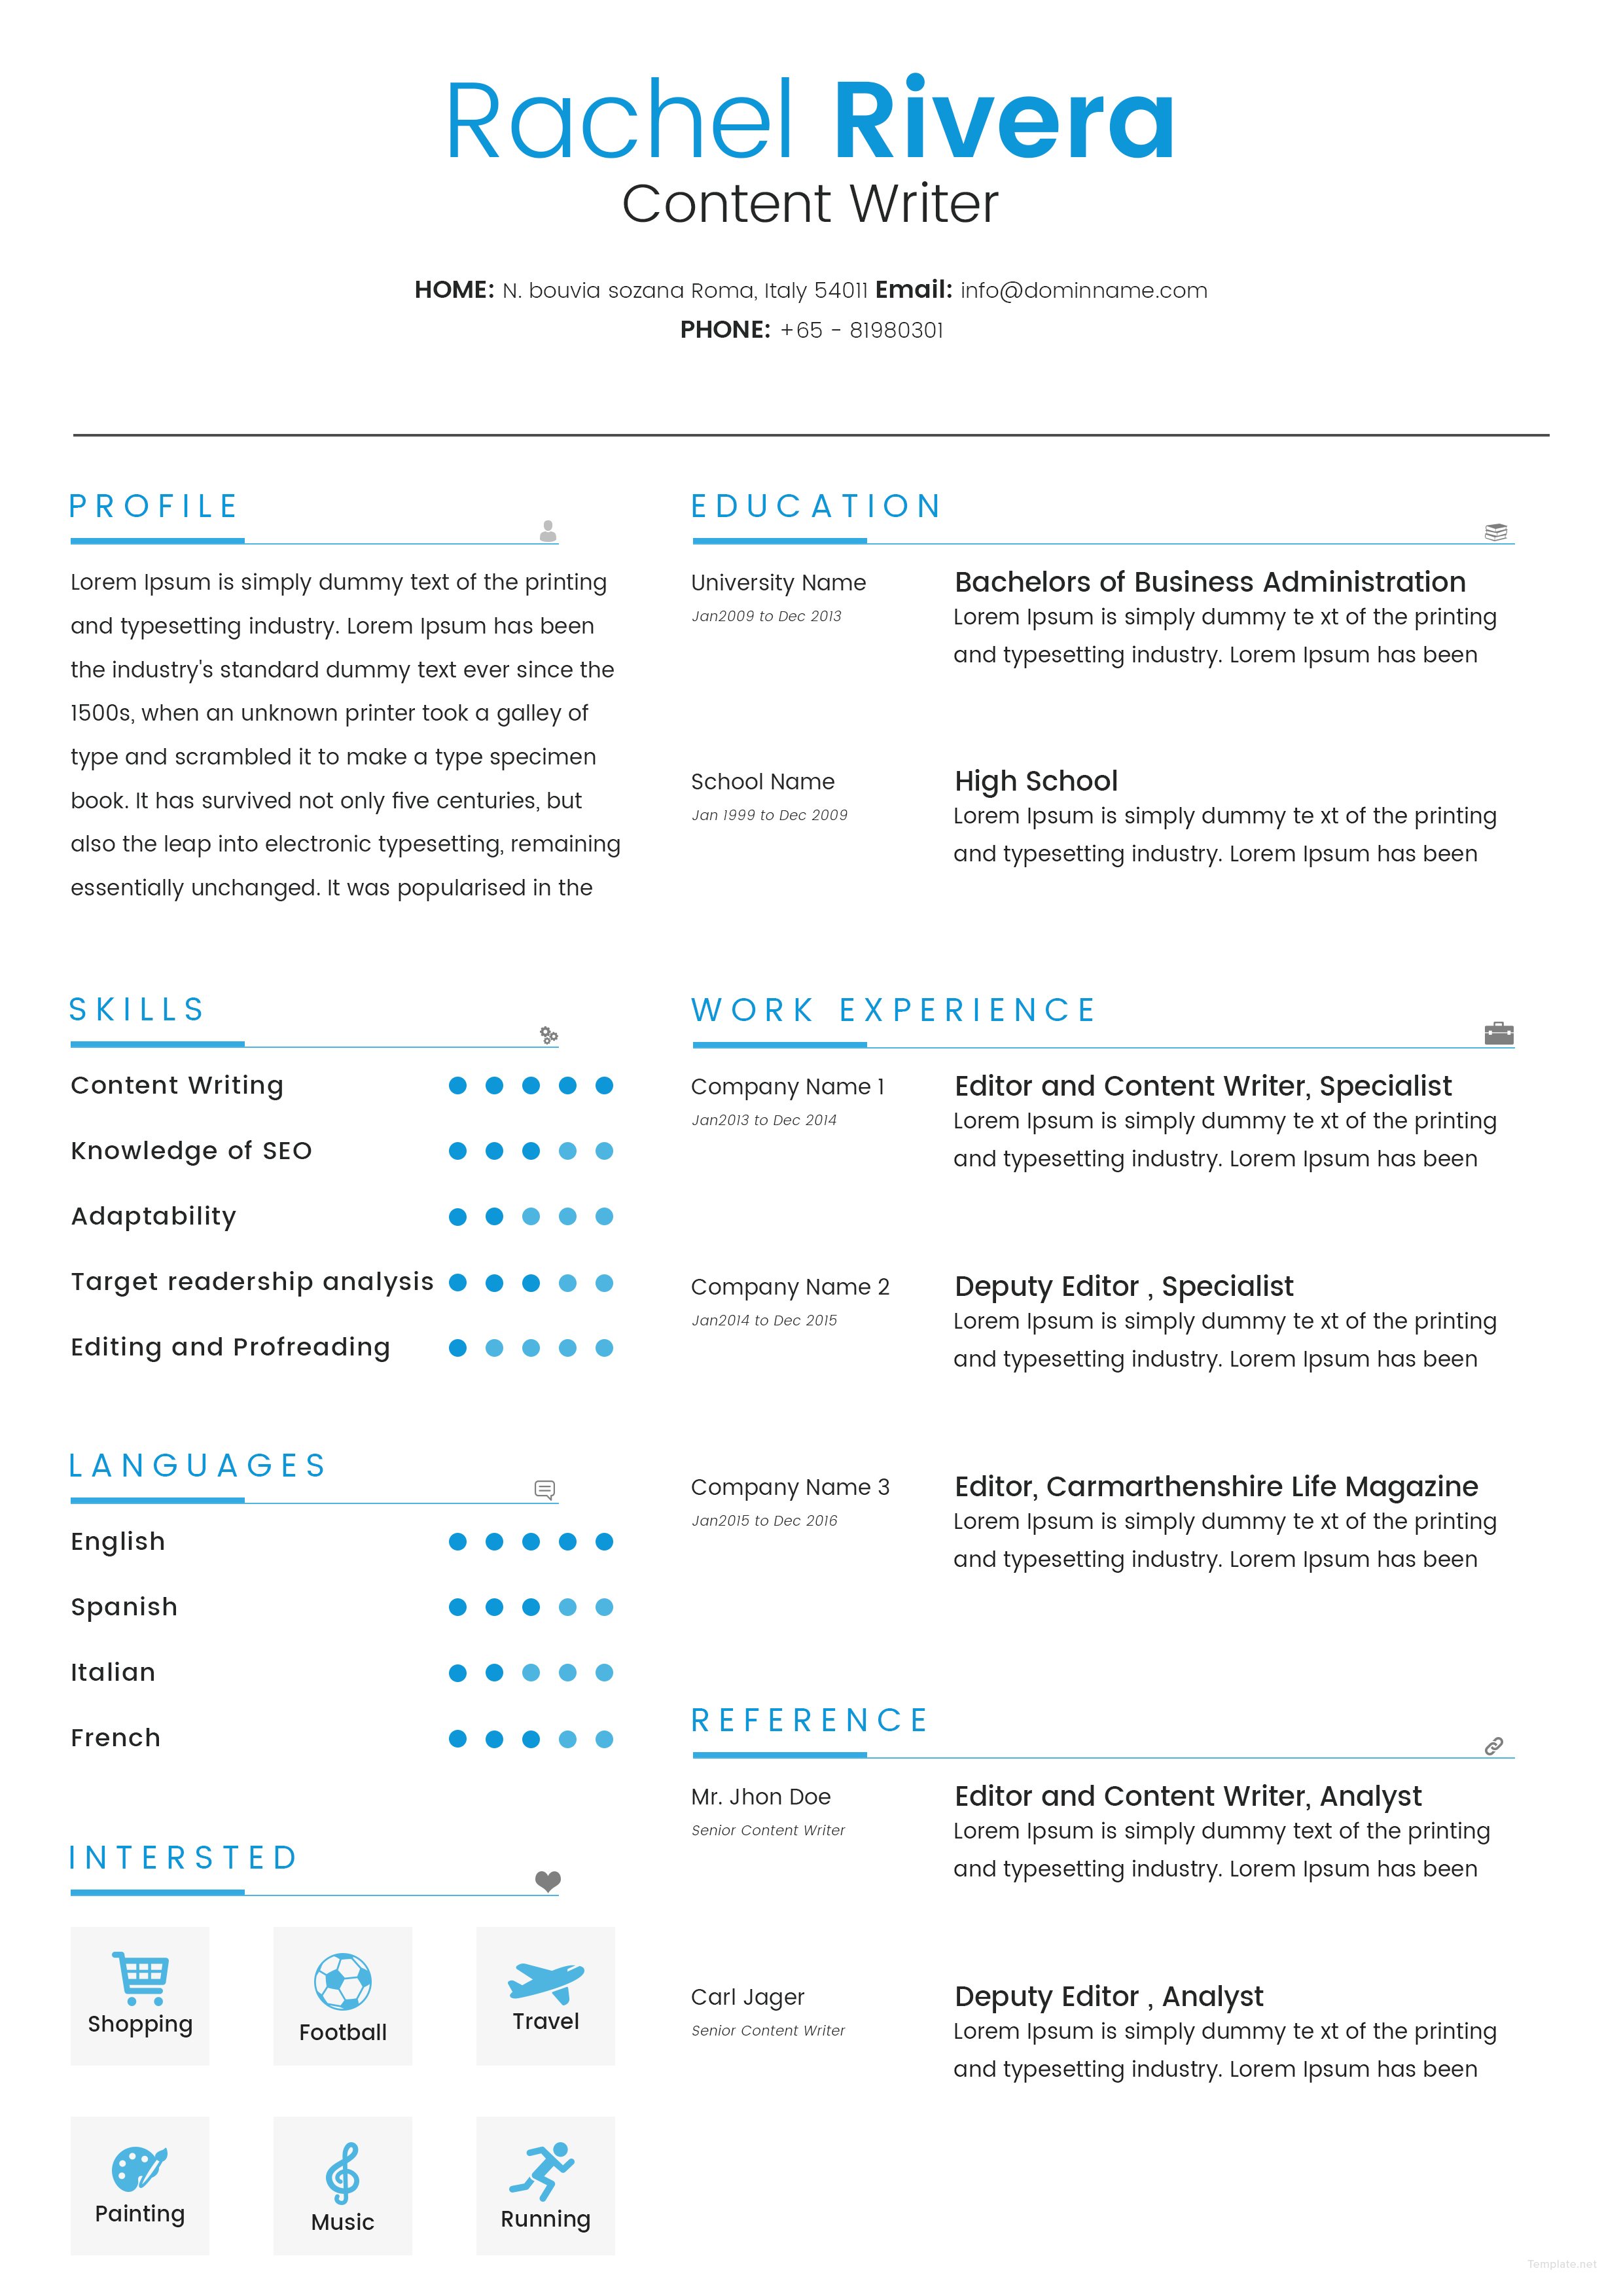 resume writers templates word free download